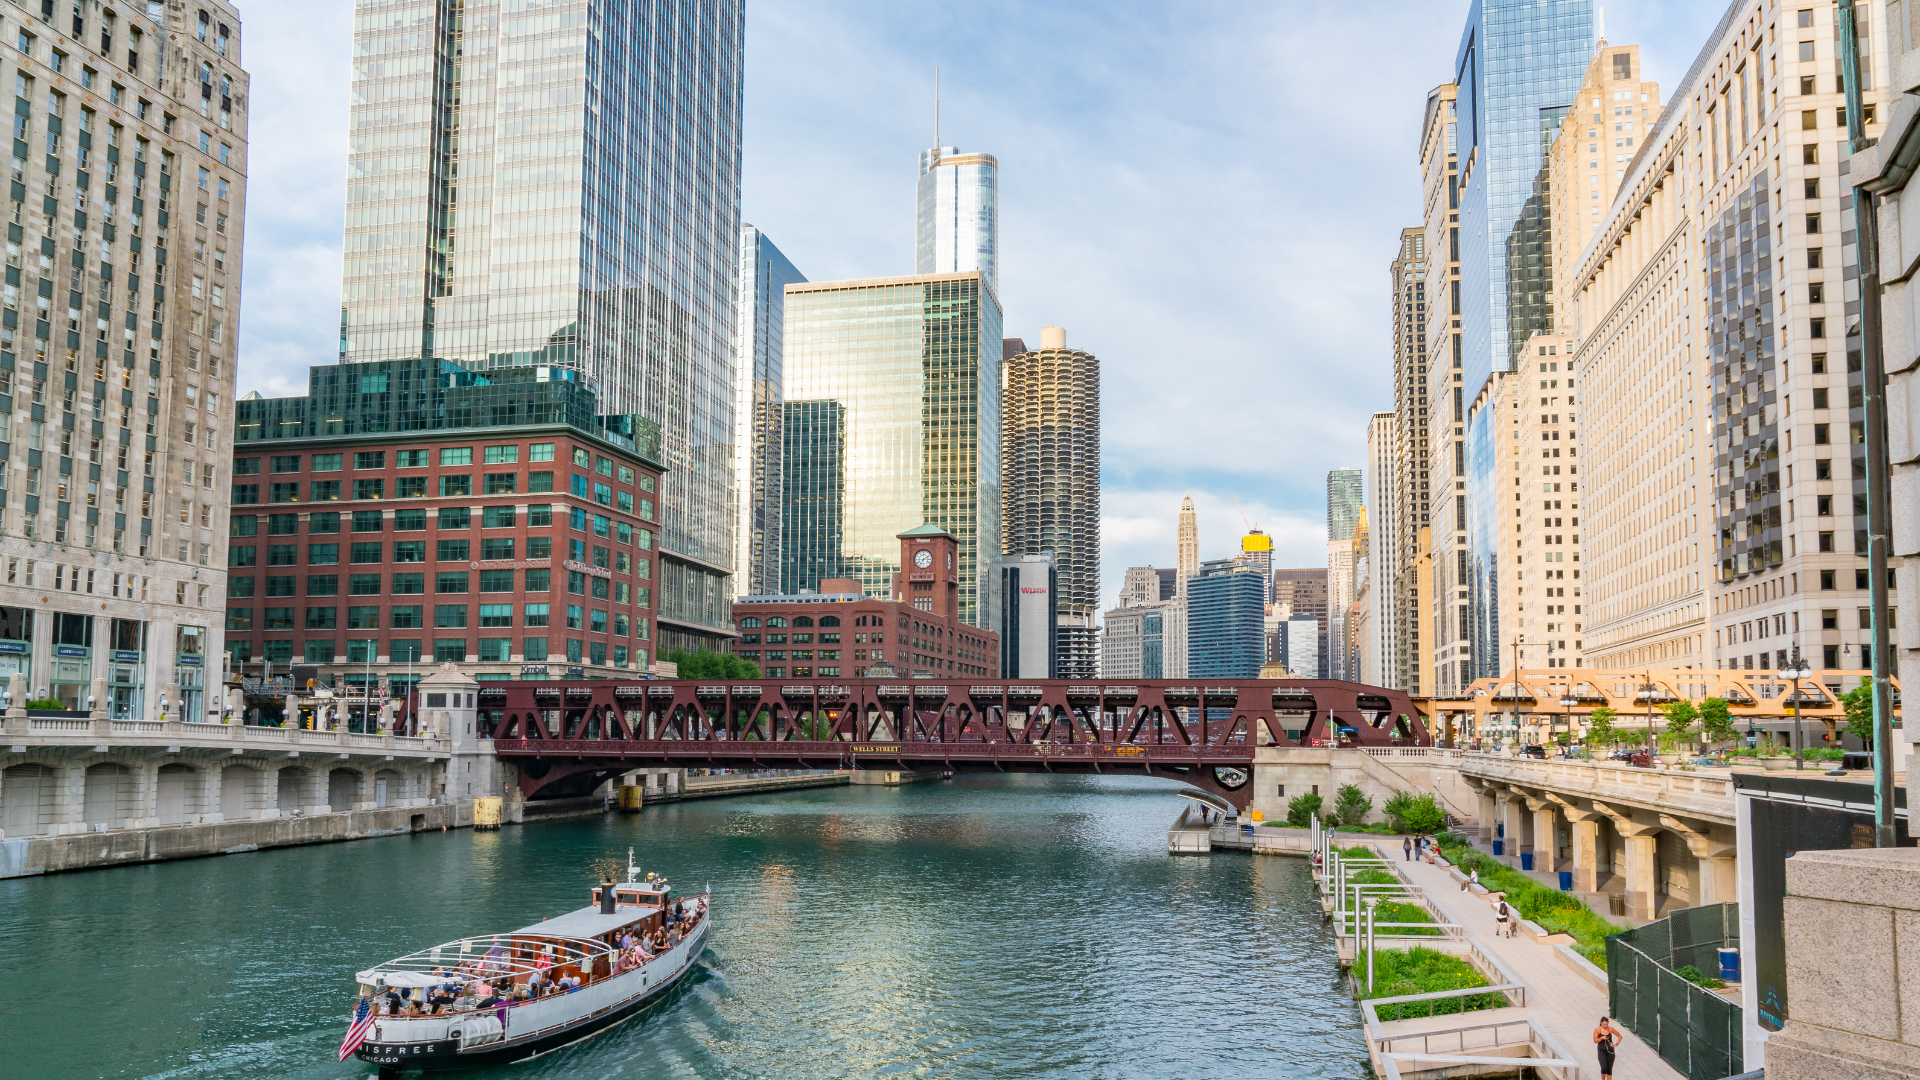 An image of the Chicago river